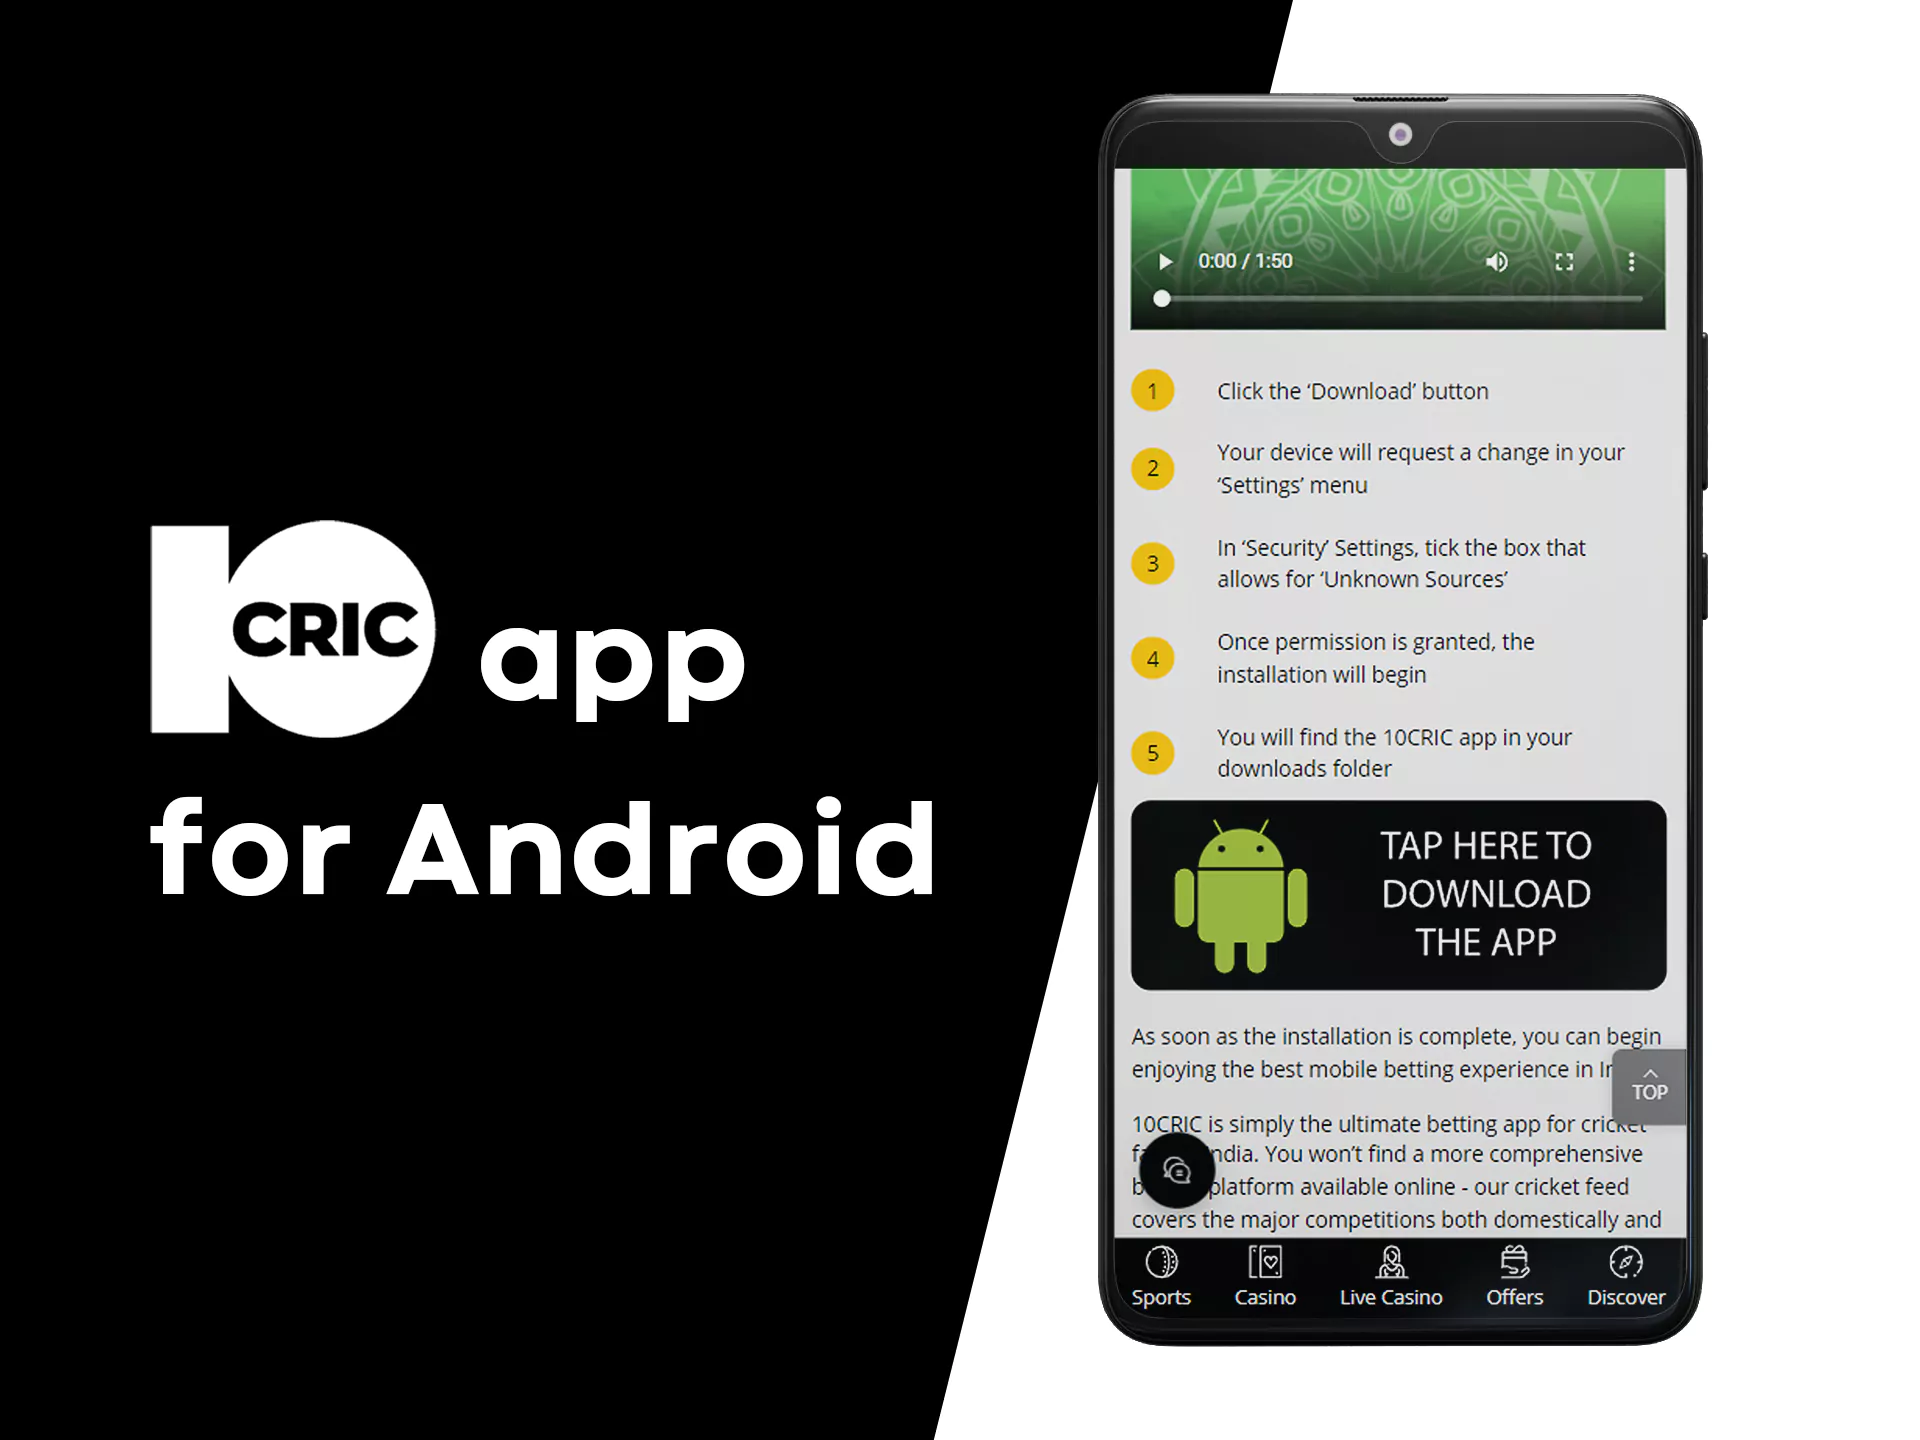 You can download the 10Cric app for Android for free.